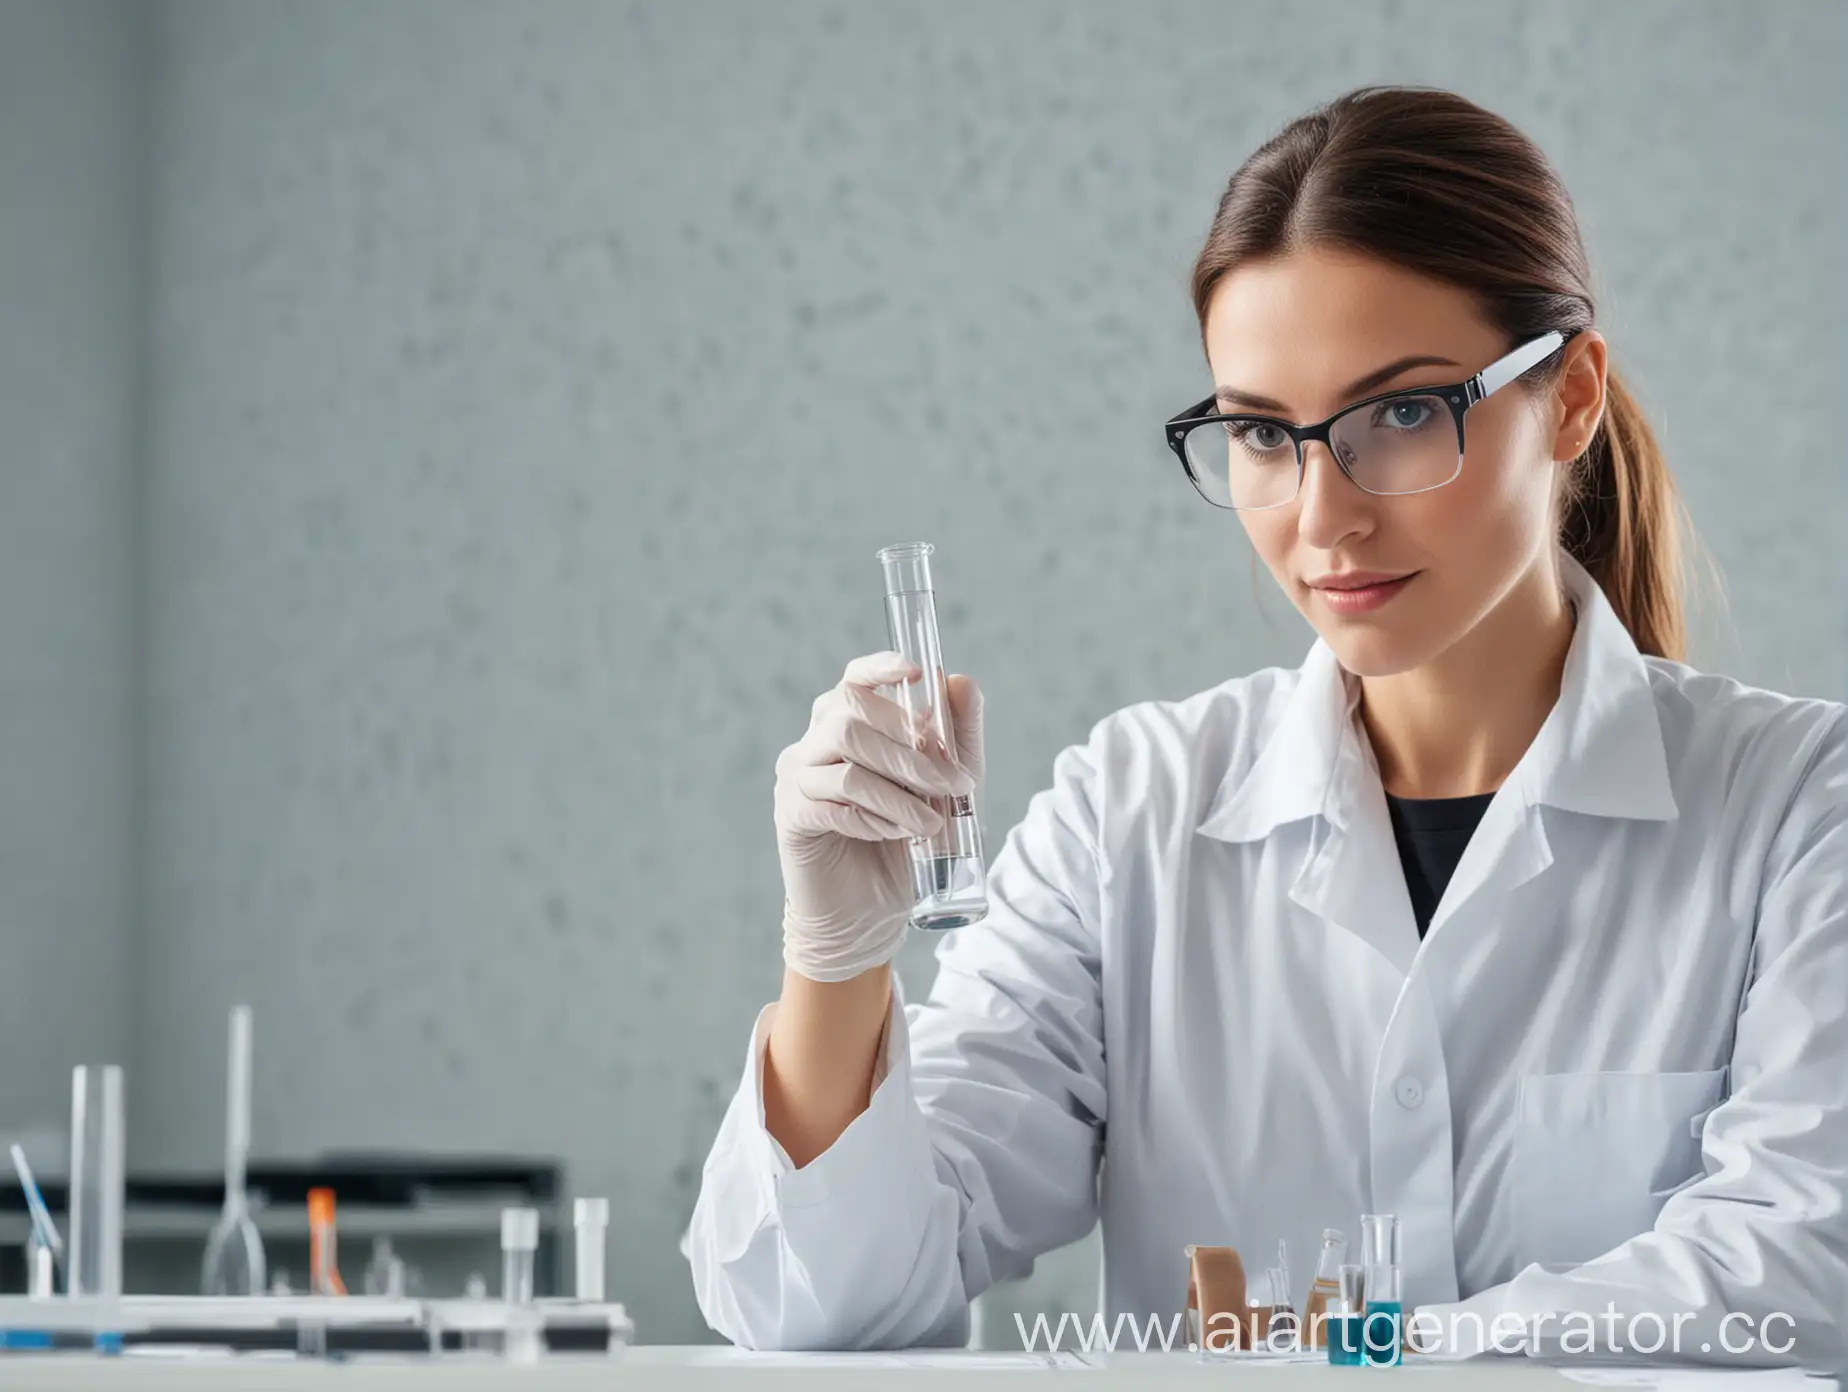 Scientist-Studying-Substance-with-Test-Tube-in-Laboratory